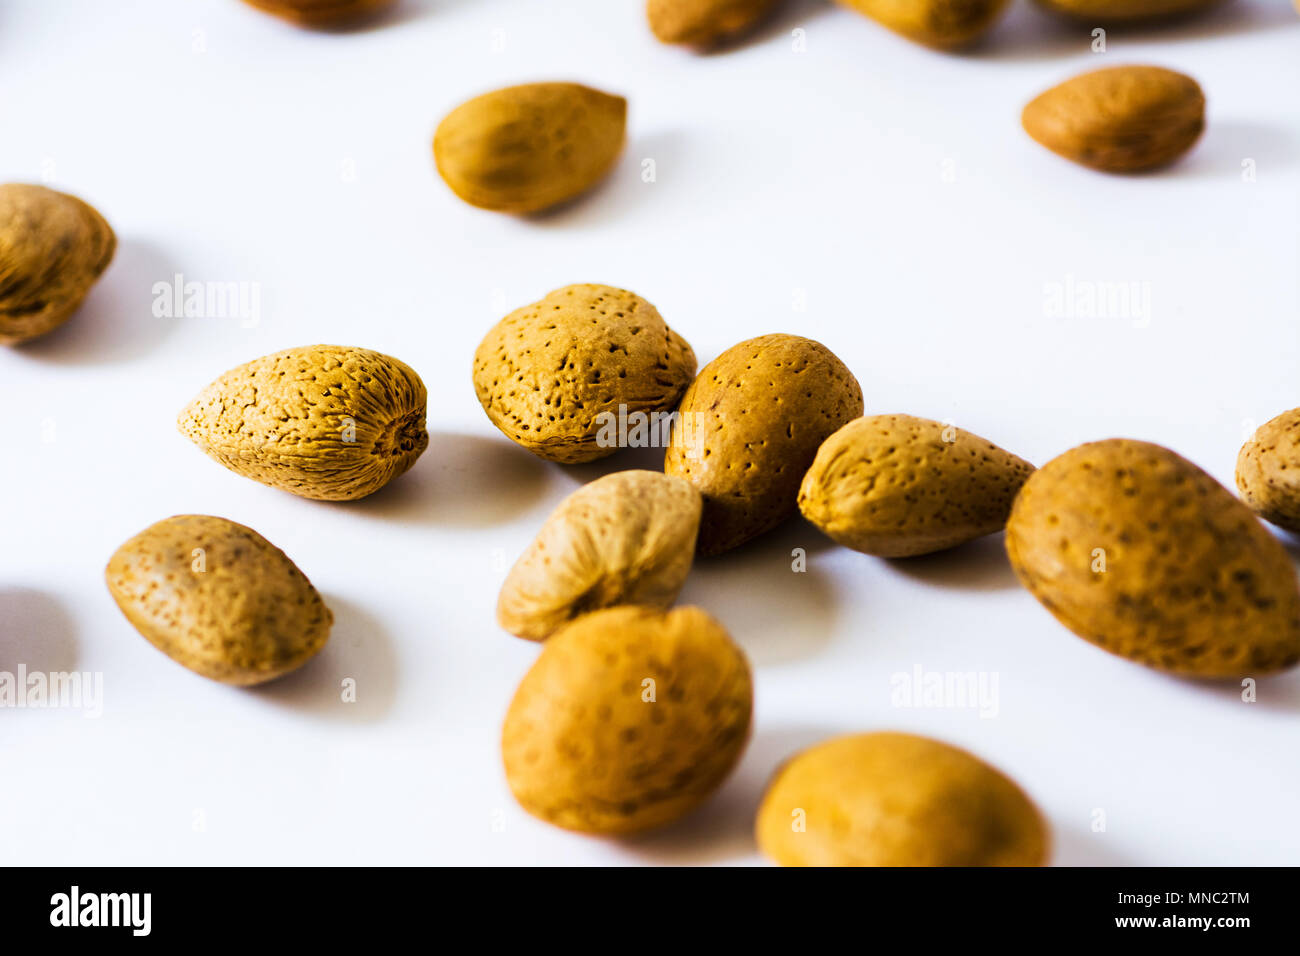 Fresh almonds in shell close up shot Stock Photo